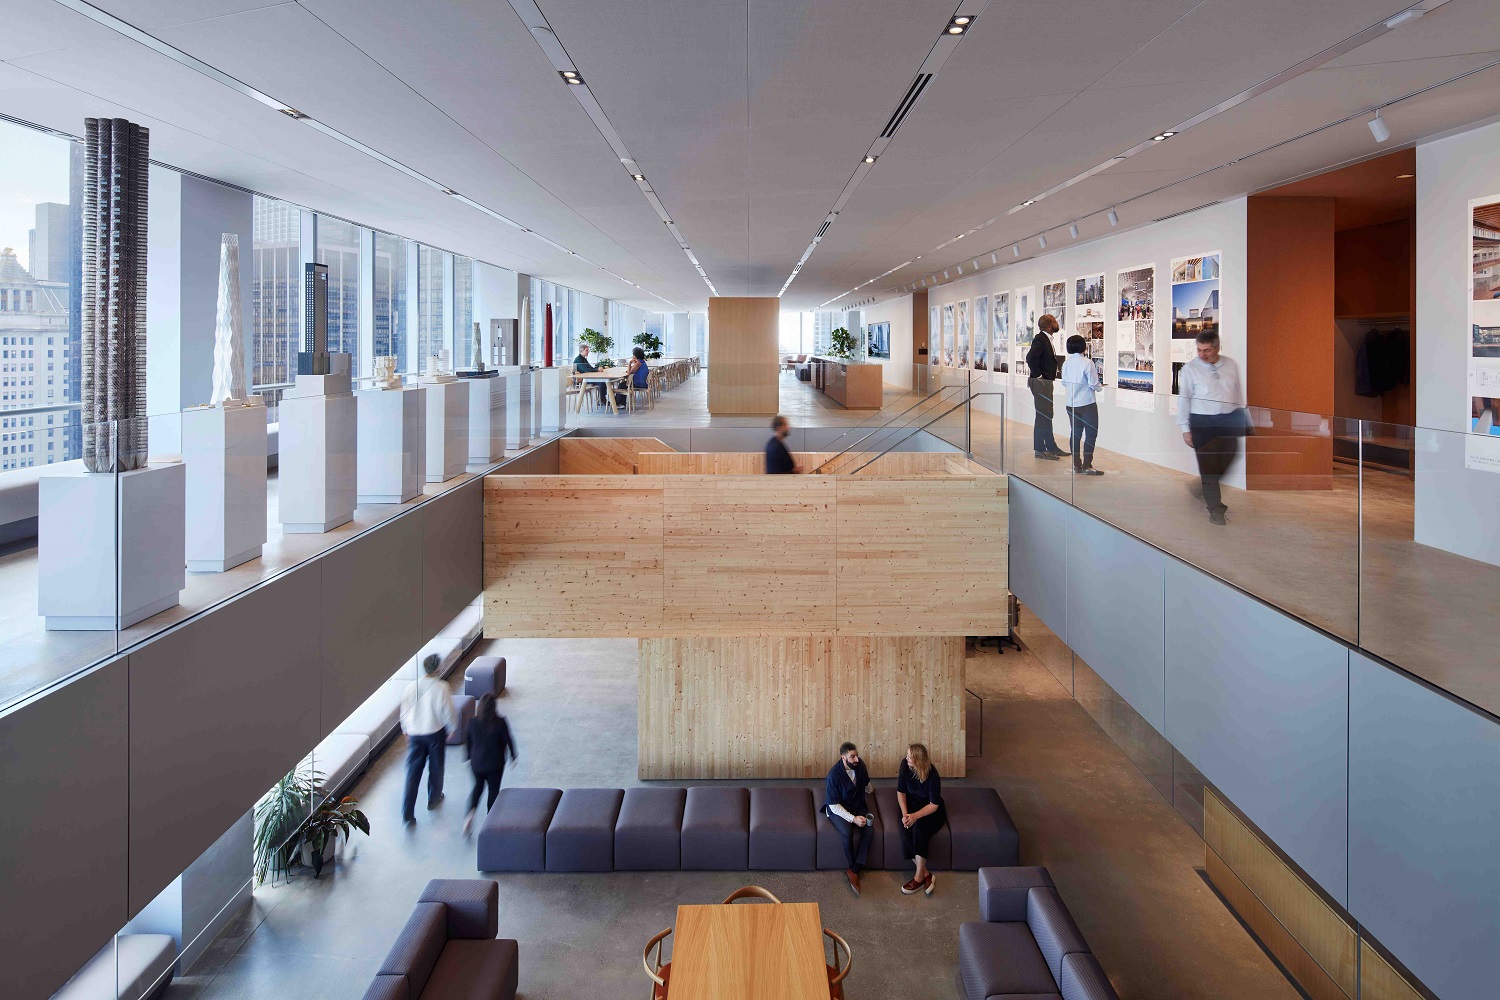 Interior of SOM's office space